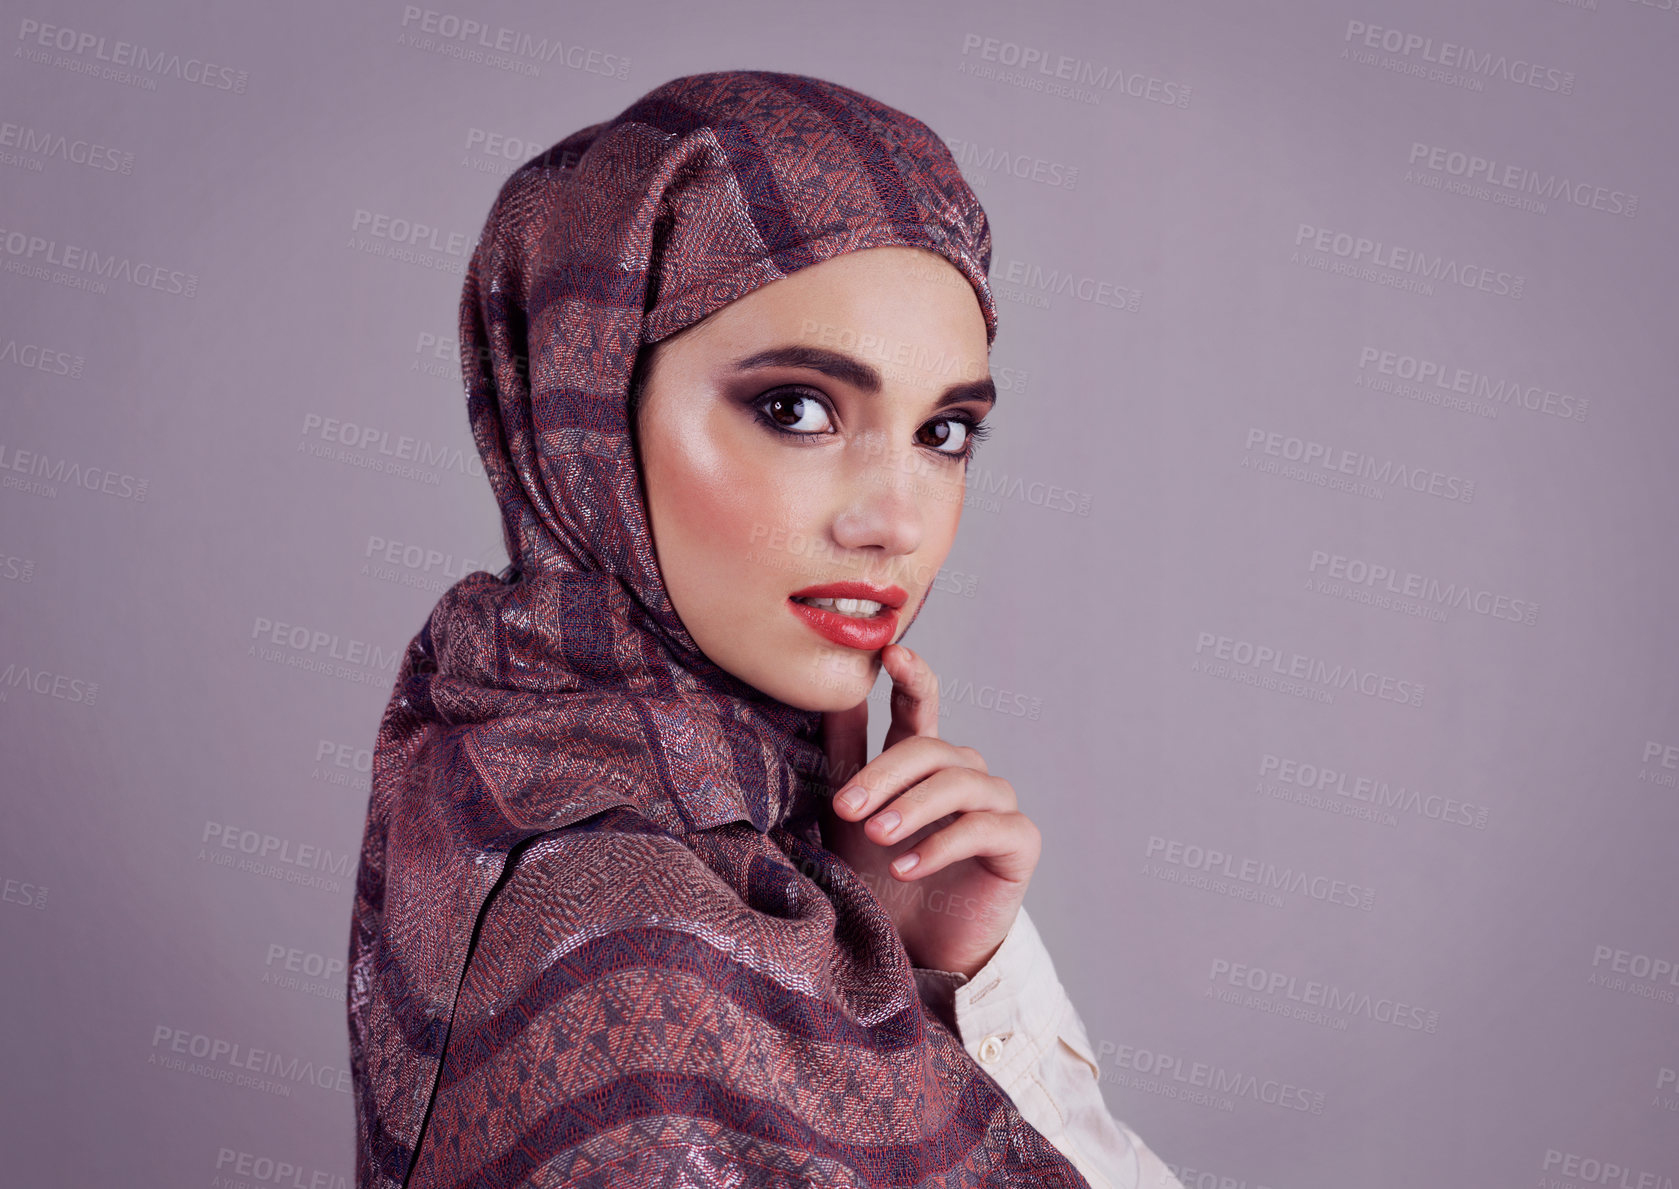 Buy stock photo Studio portrait of a confident young woman wearing a colorful head scarf while applying red lipstick to her lips